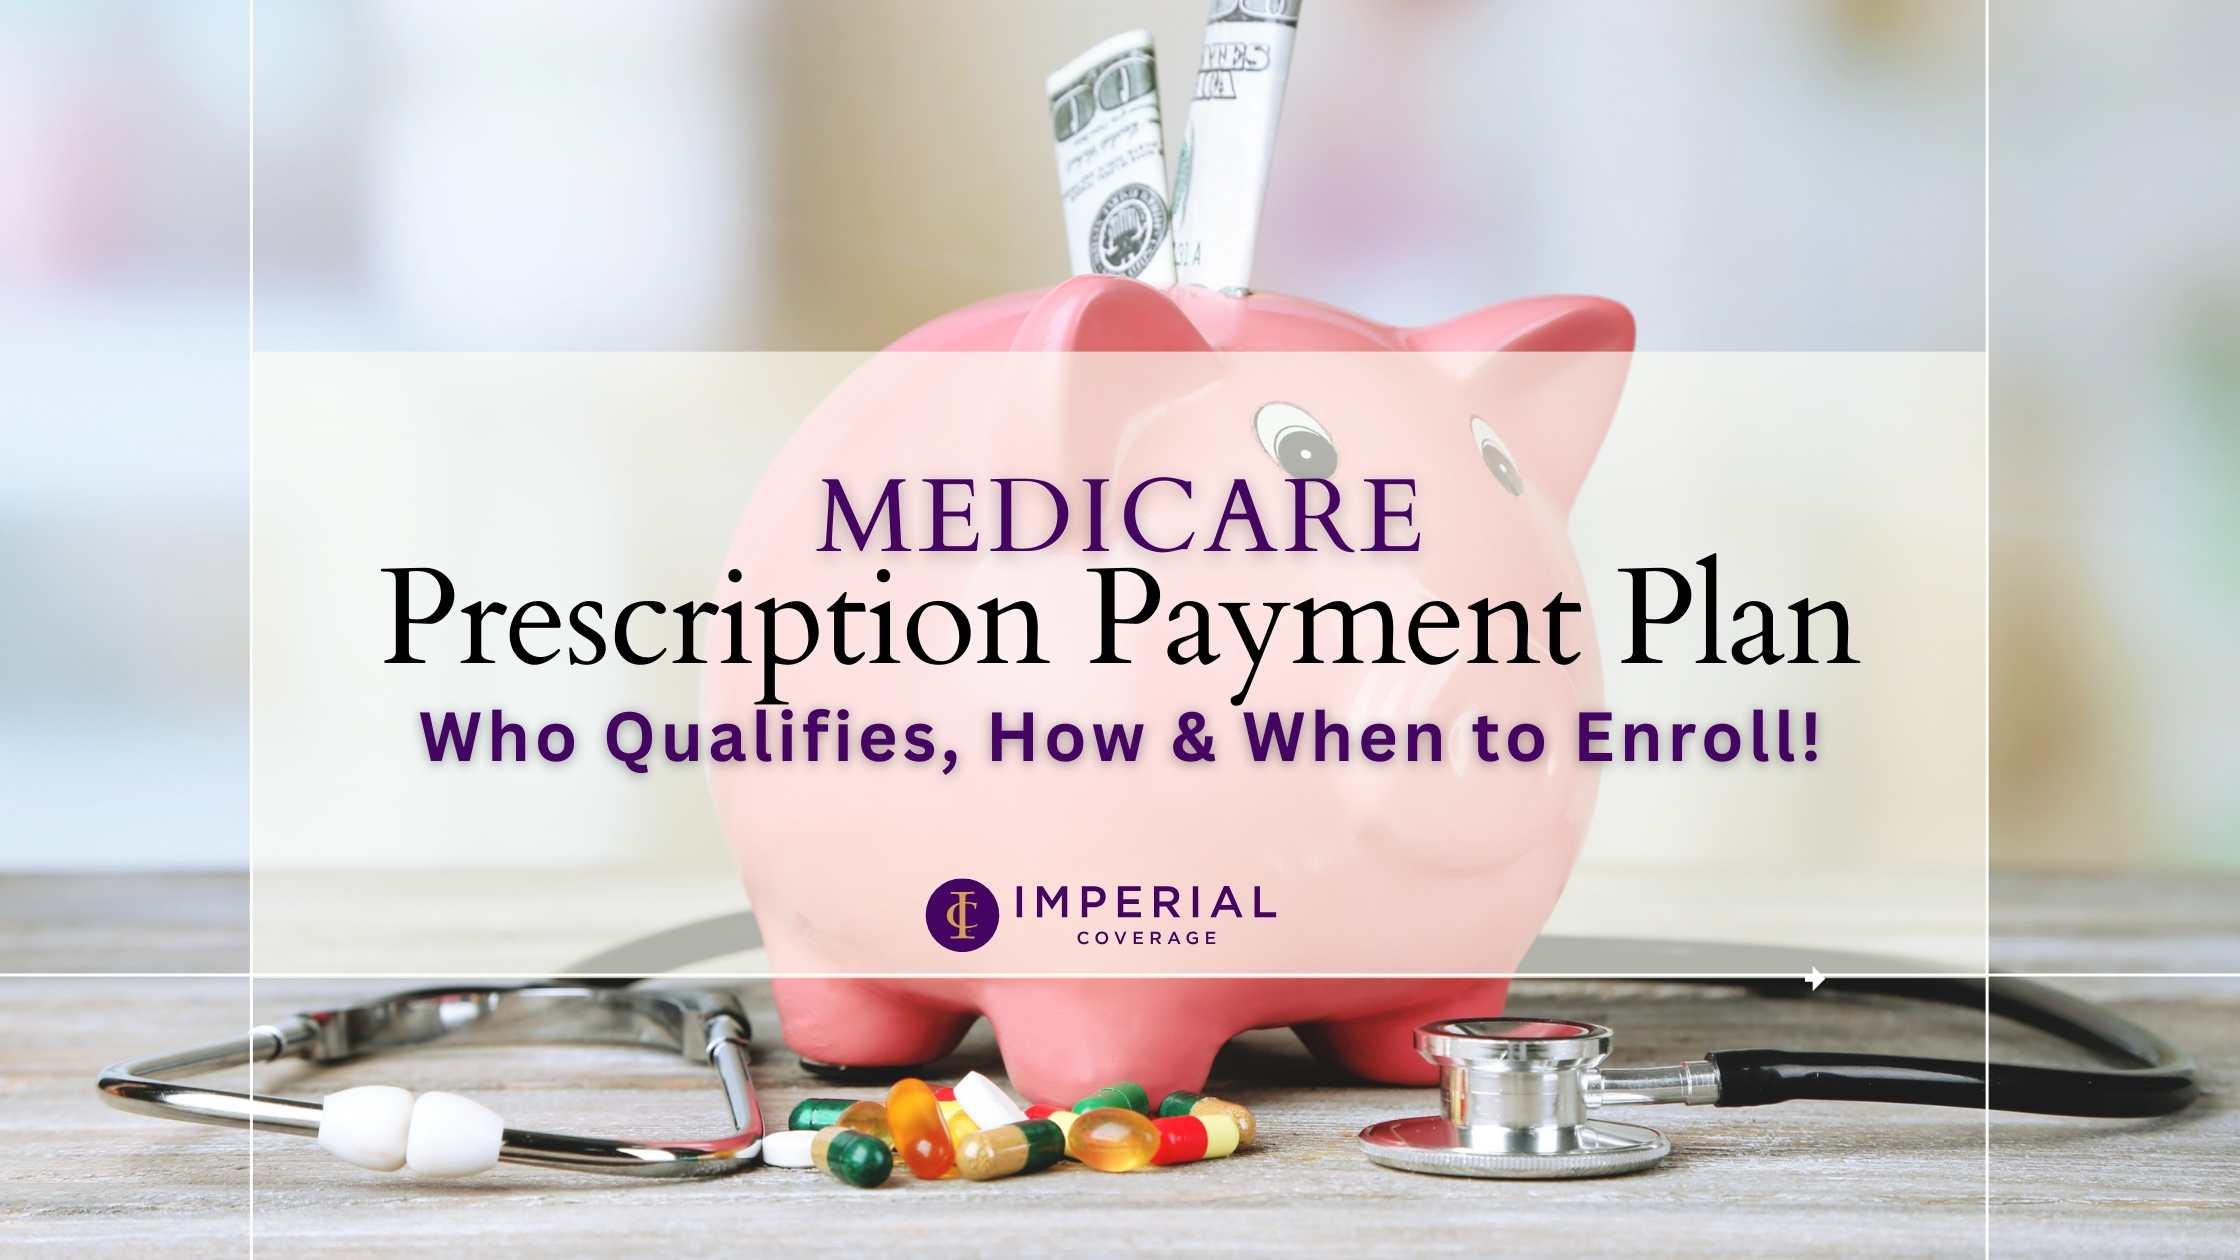 Introducing the New Medicare Payment Plan for Prescription Drugs